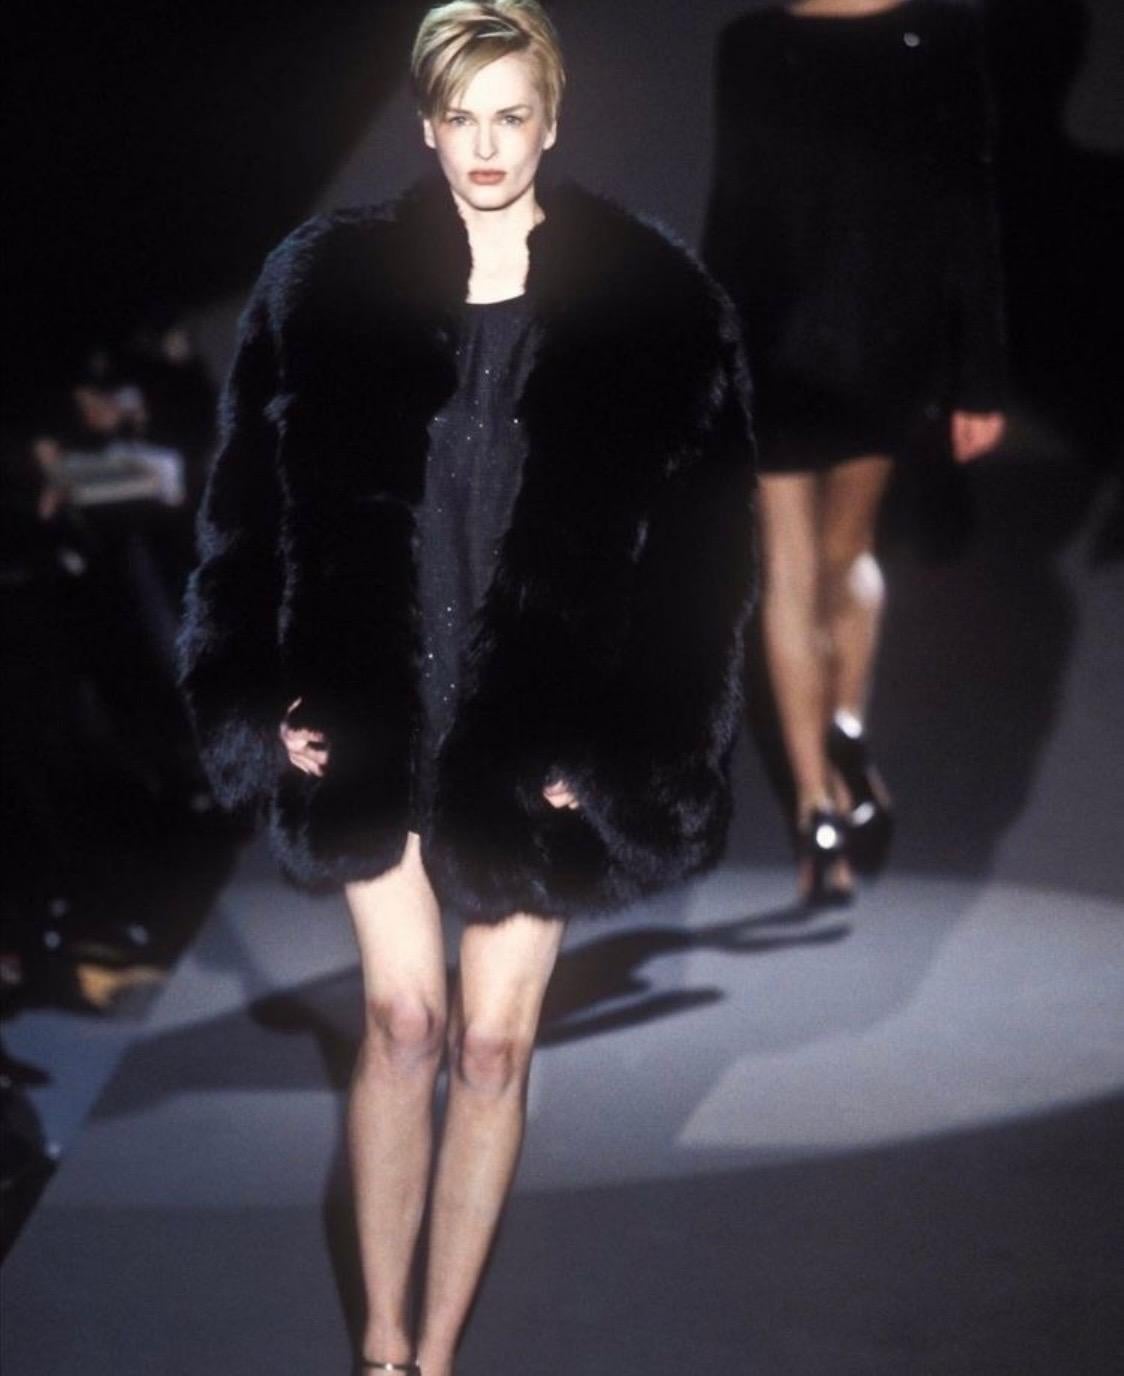 Presenting one of Tom Ford's most lusted-after designs during his tenure at the house of Gucci. This oversized black fox fur chubby coat debuted on Fall/Winter 1997 runway presentation on Kylie Bax. The coat is lined in matching black 'GG' monogram